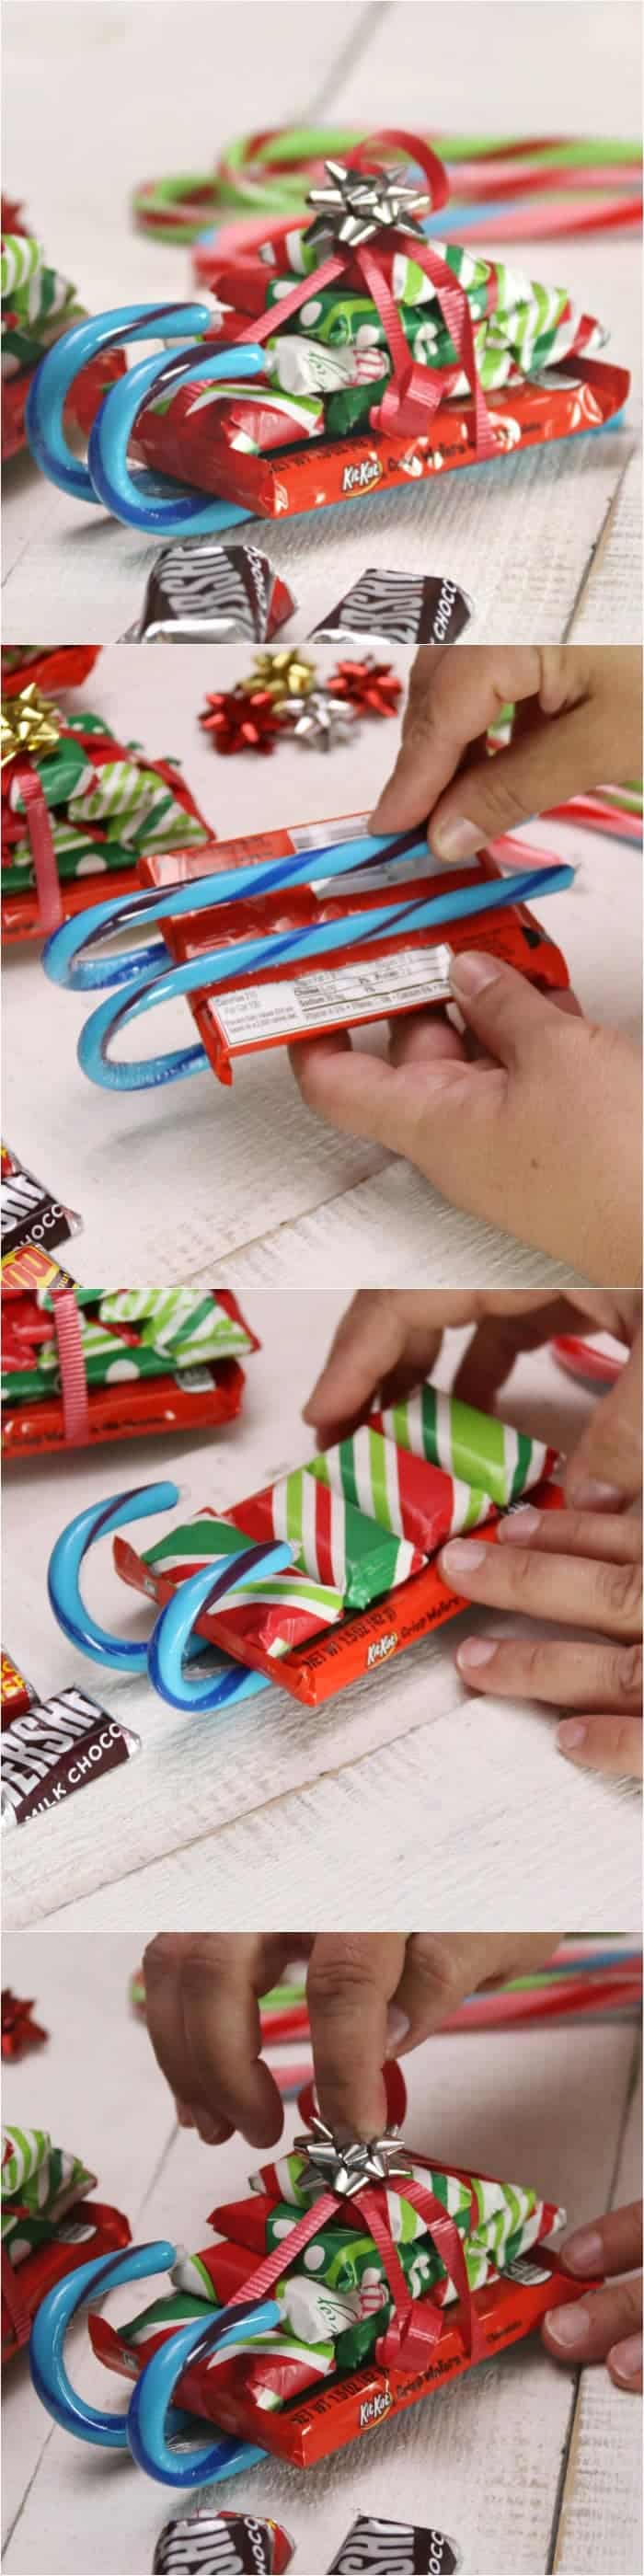 How to Make Candy Cane Sleighs with Candy Bars for Christmas! 